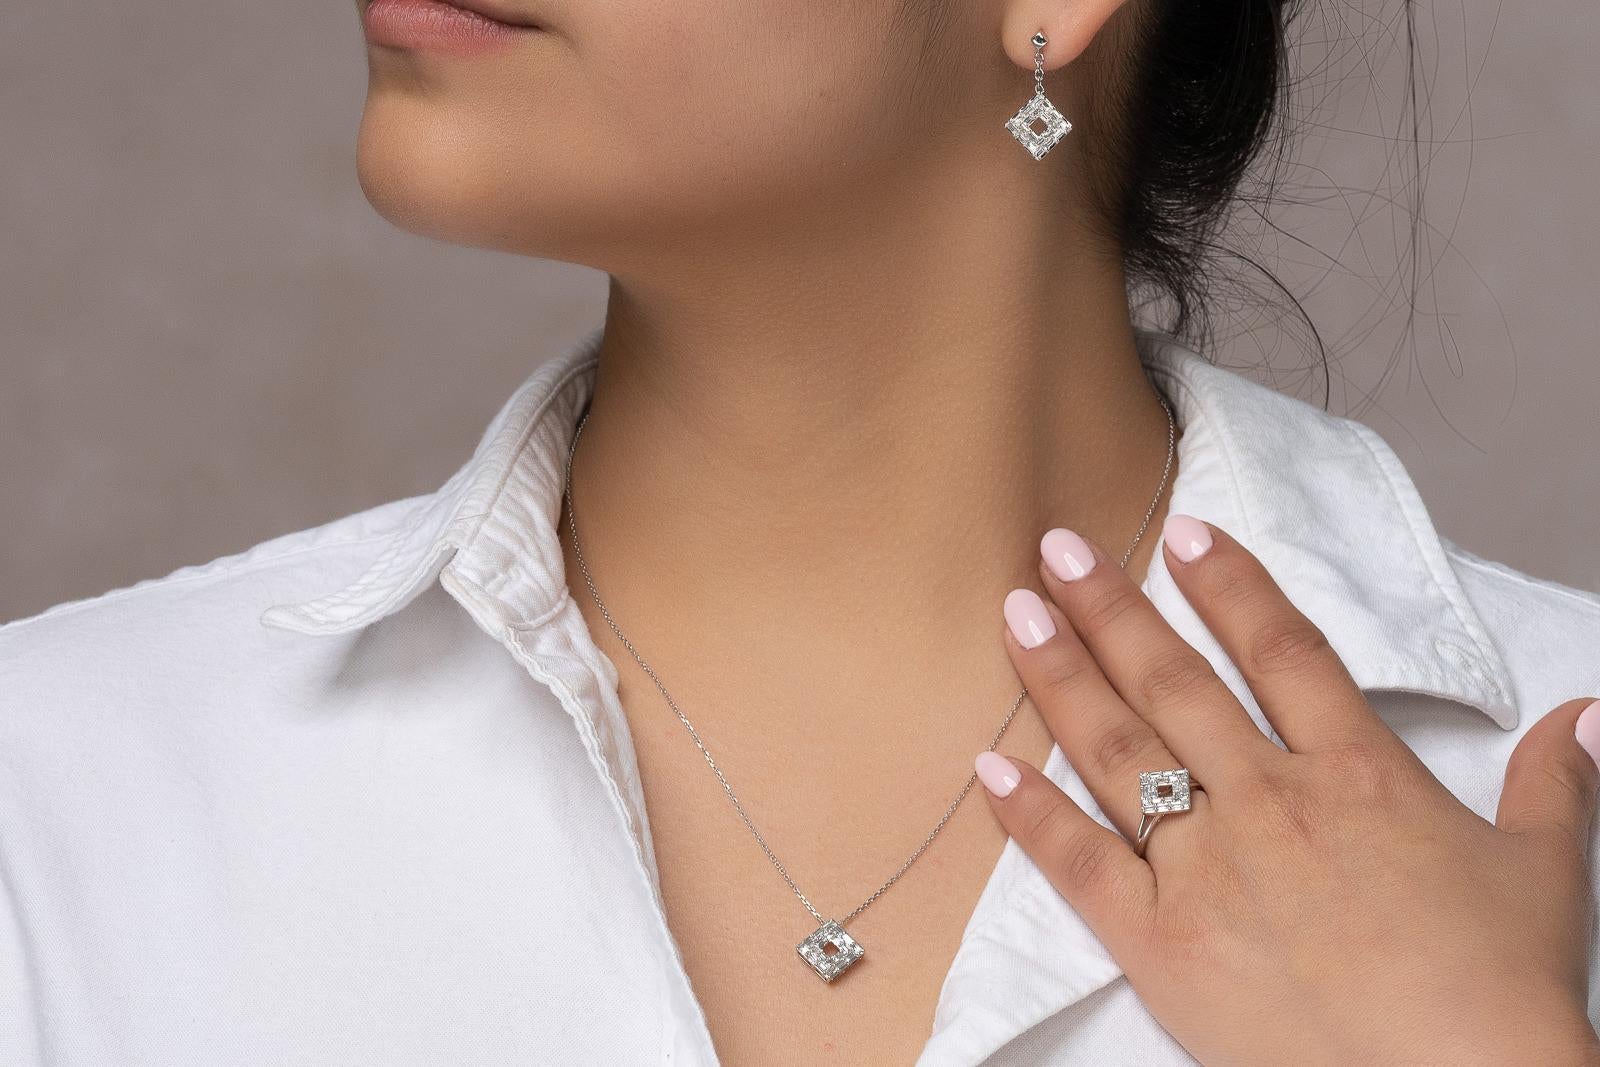 A simple yet stunning piece, this 14k white gold diamond pendant embodies the meaning of elegant everyday fine jewelry. The pendant features solely baguette diamonds that creates a sharp and clean geometric look that’s universal in style. Wear it